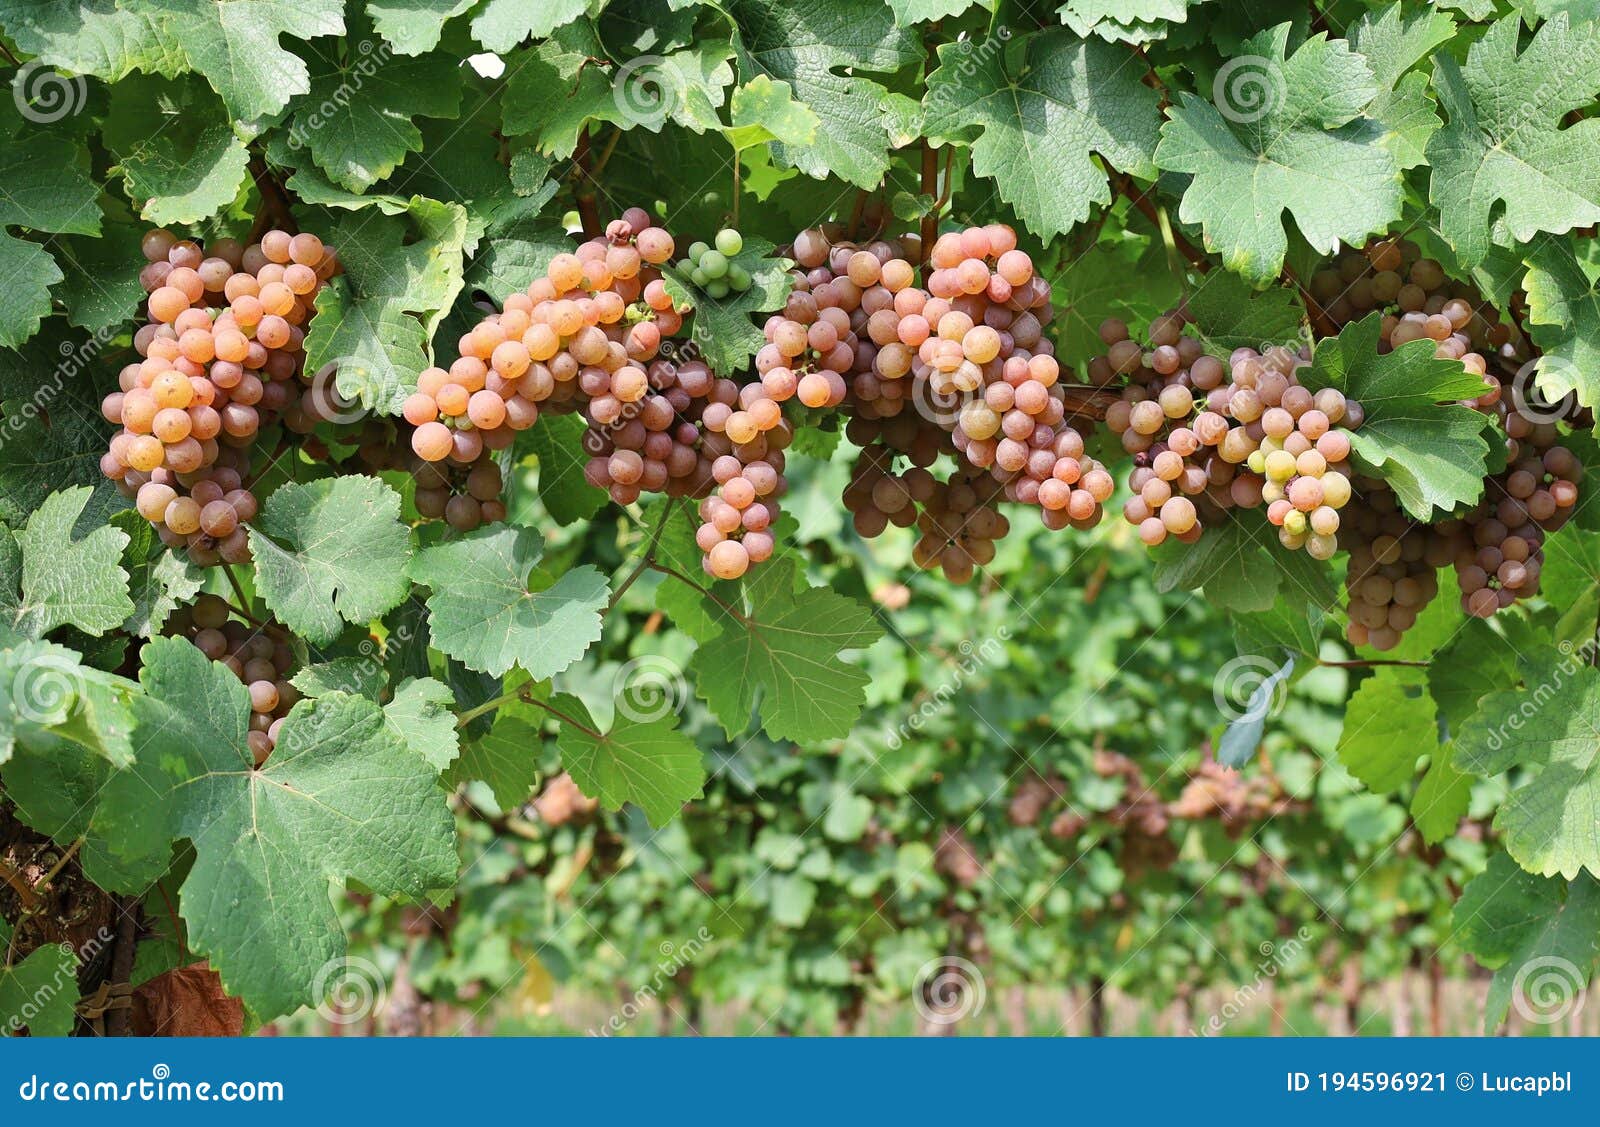 pinot gris grapes, brownish pink variety, hanging on vine few days before the harvest